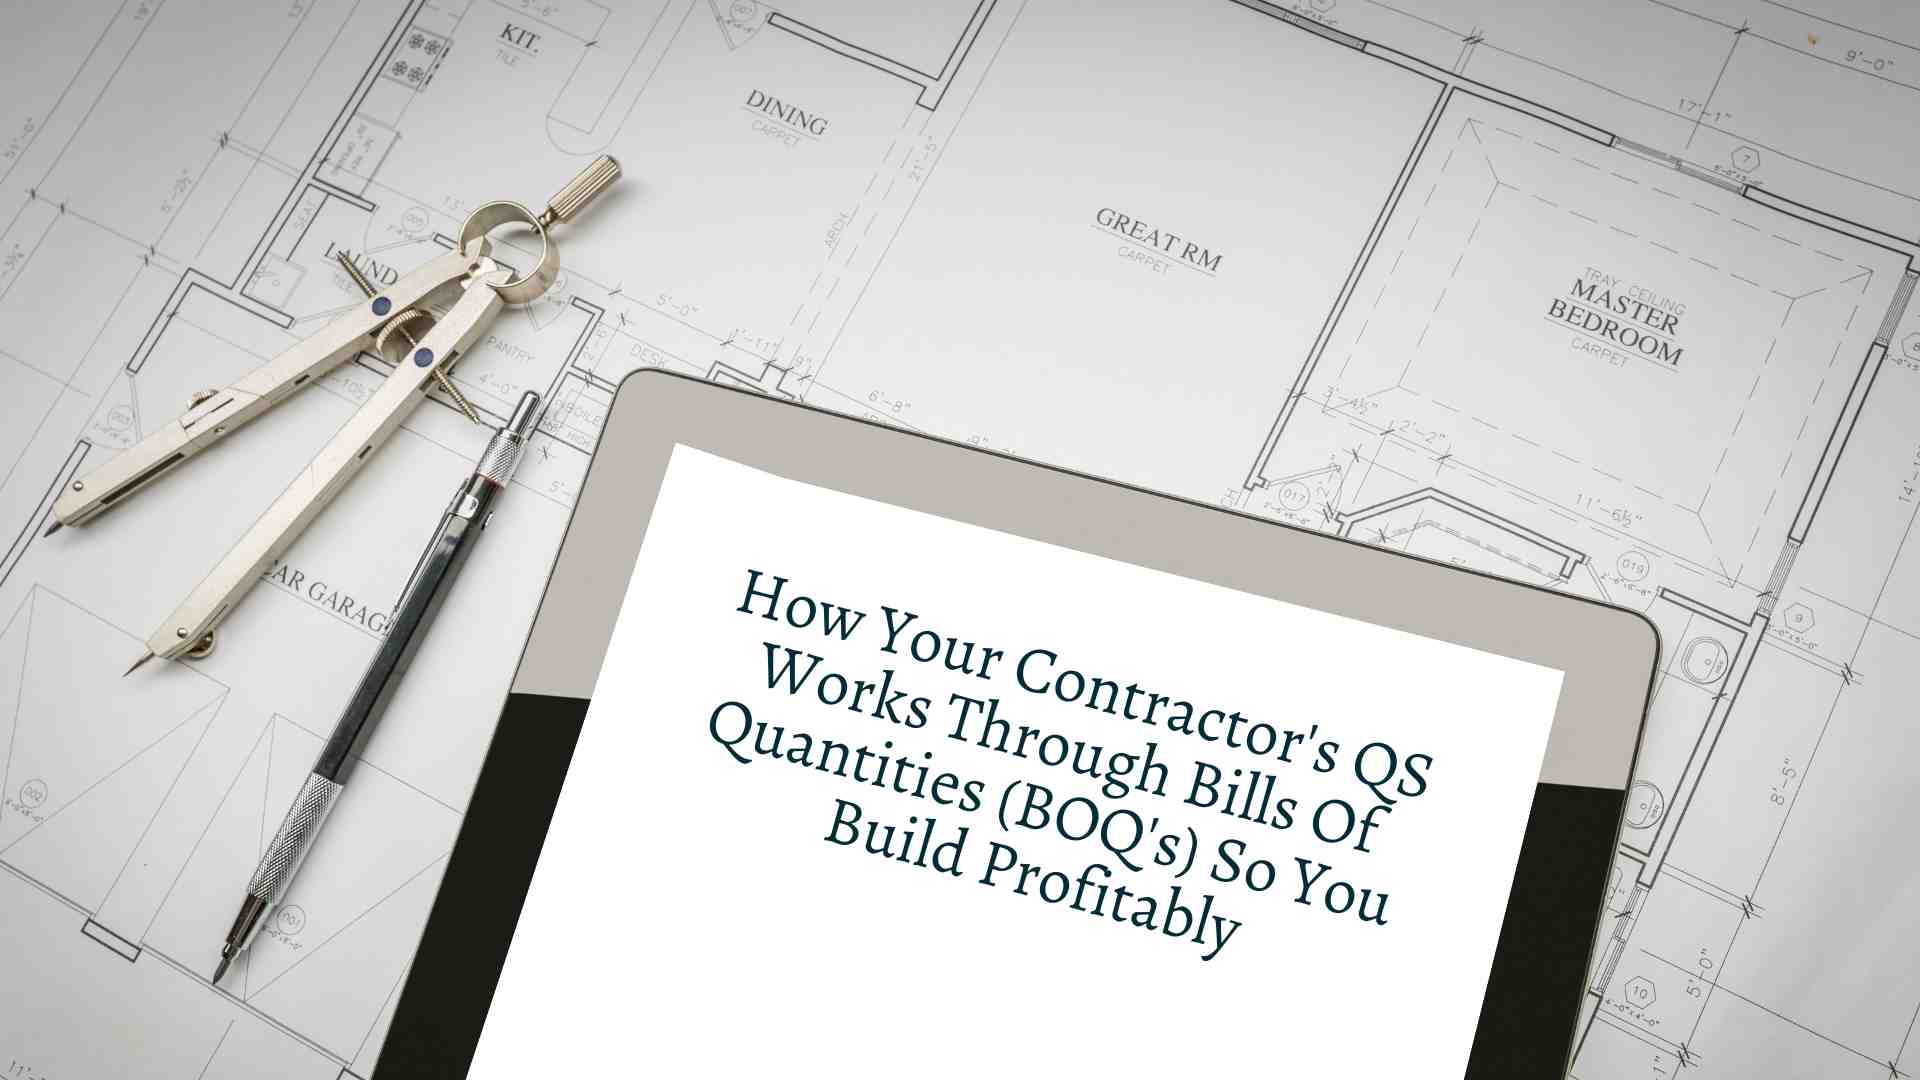 How Your Contractor’s QS Works Through Bills Of Quantities (BOQ’s) So You Build Profitably